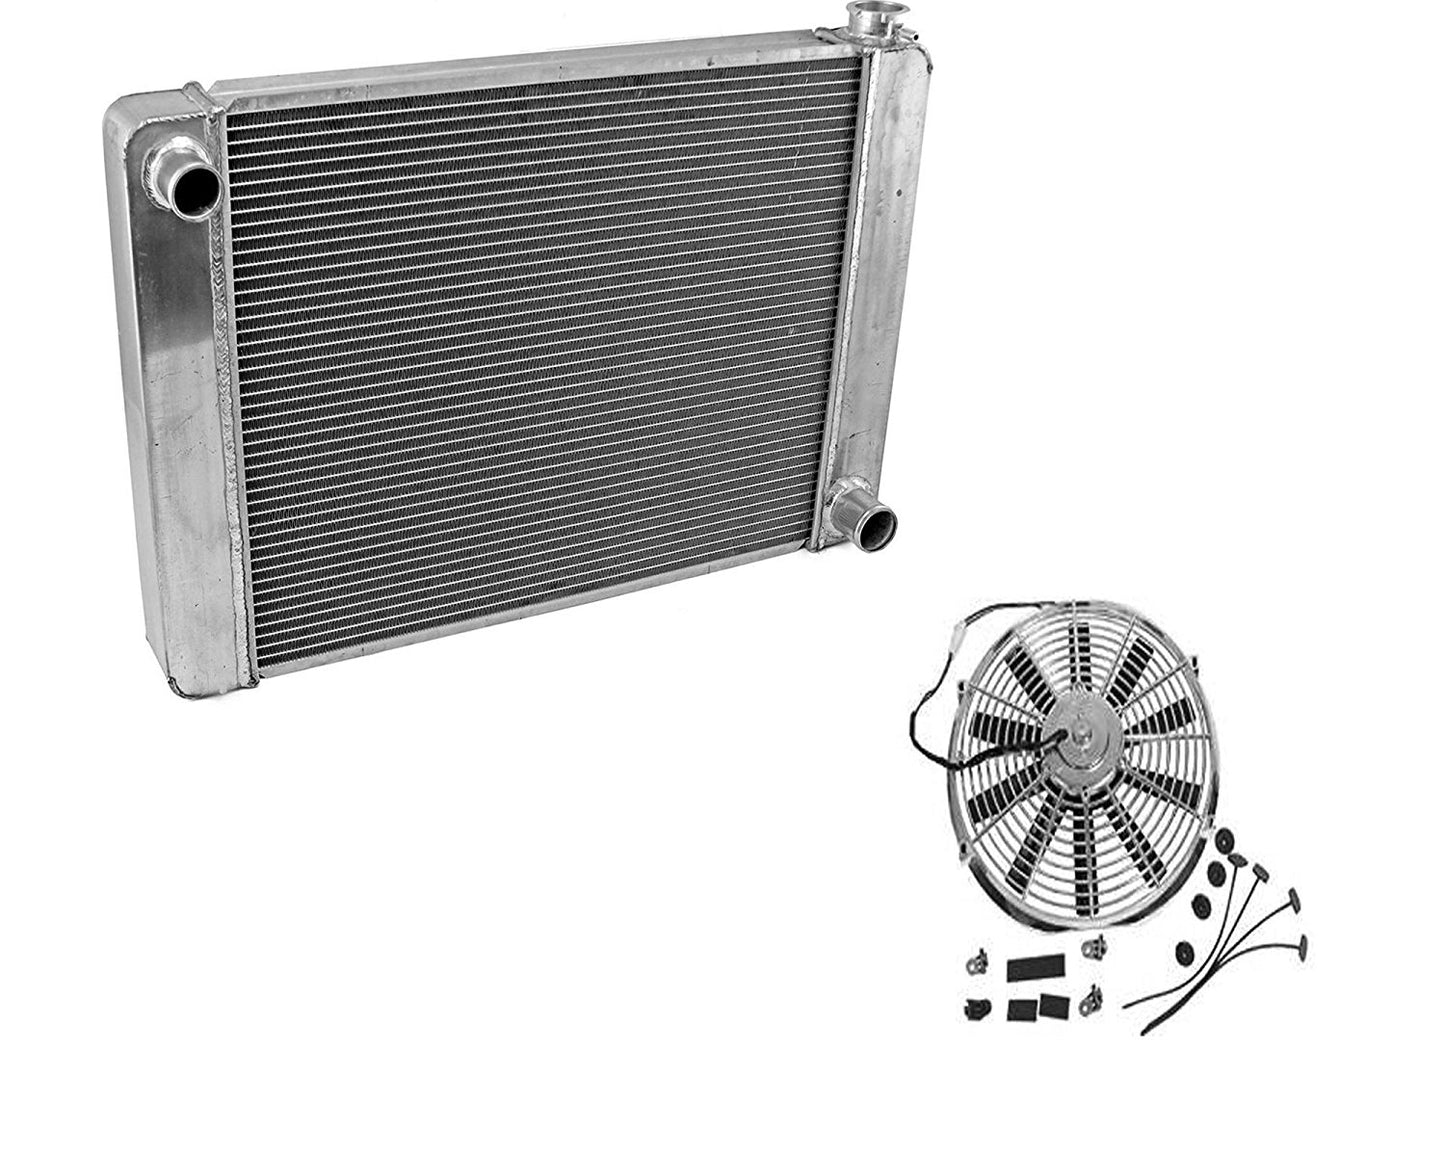 Fabricated Aluminum Radiator 24" x 19" x 3" Overall For SBC BBC Chevy GM&Electric 10" Chrome Straight Blade Cooling Radiator Fan